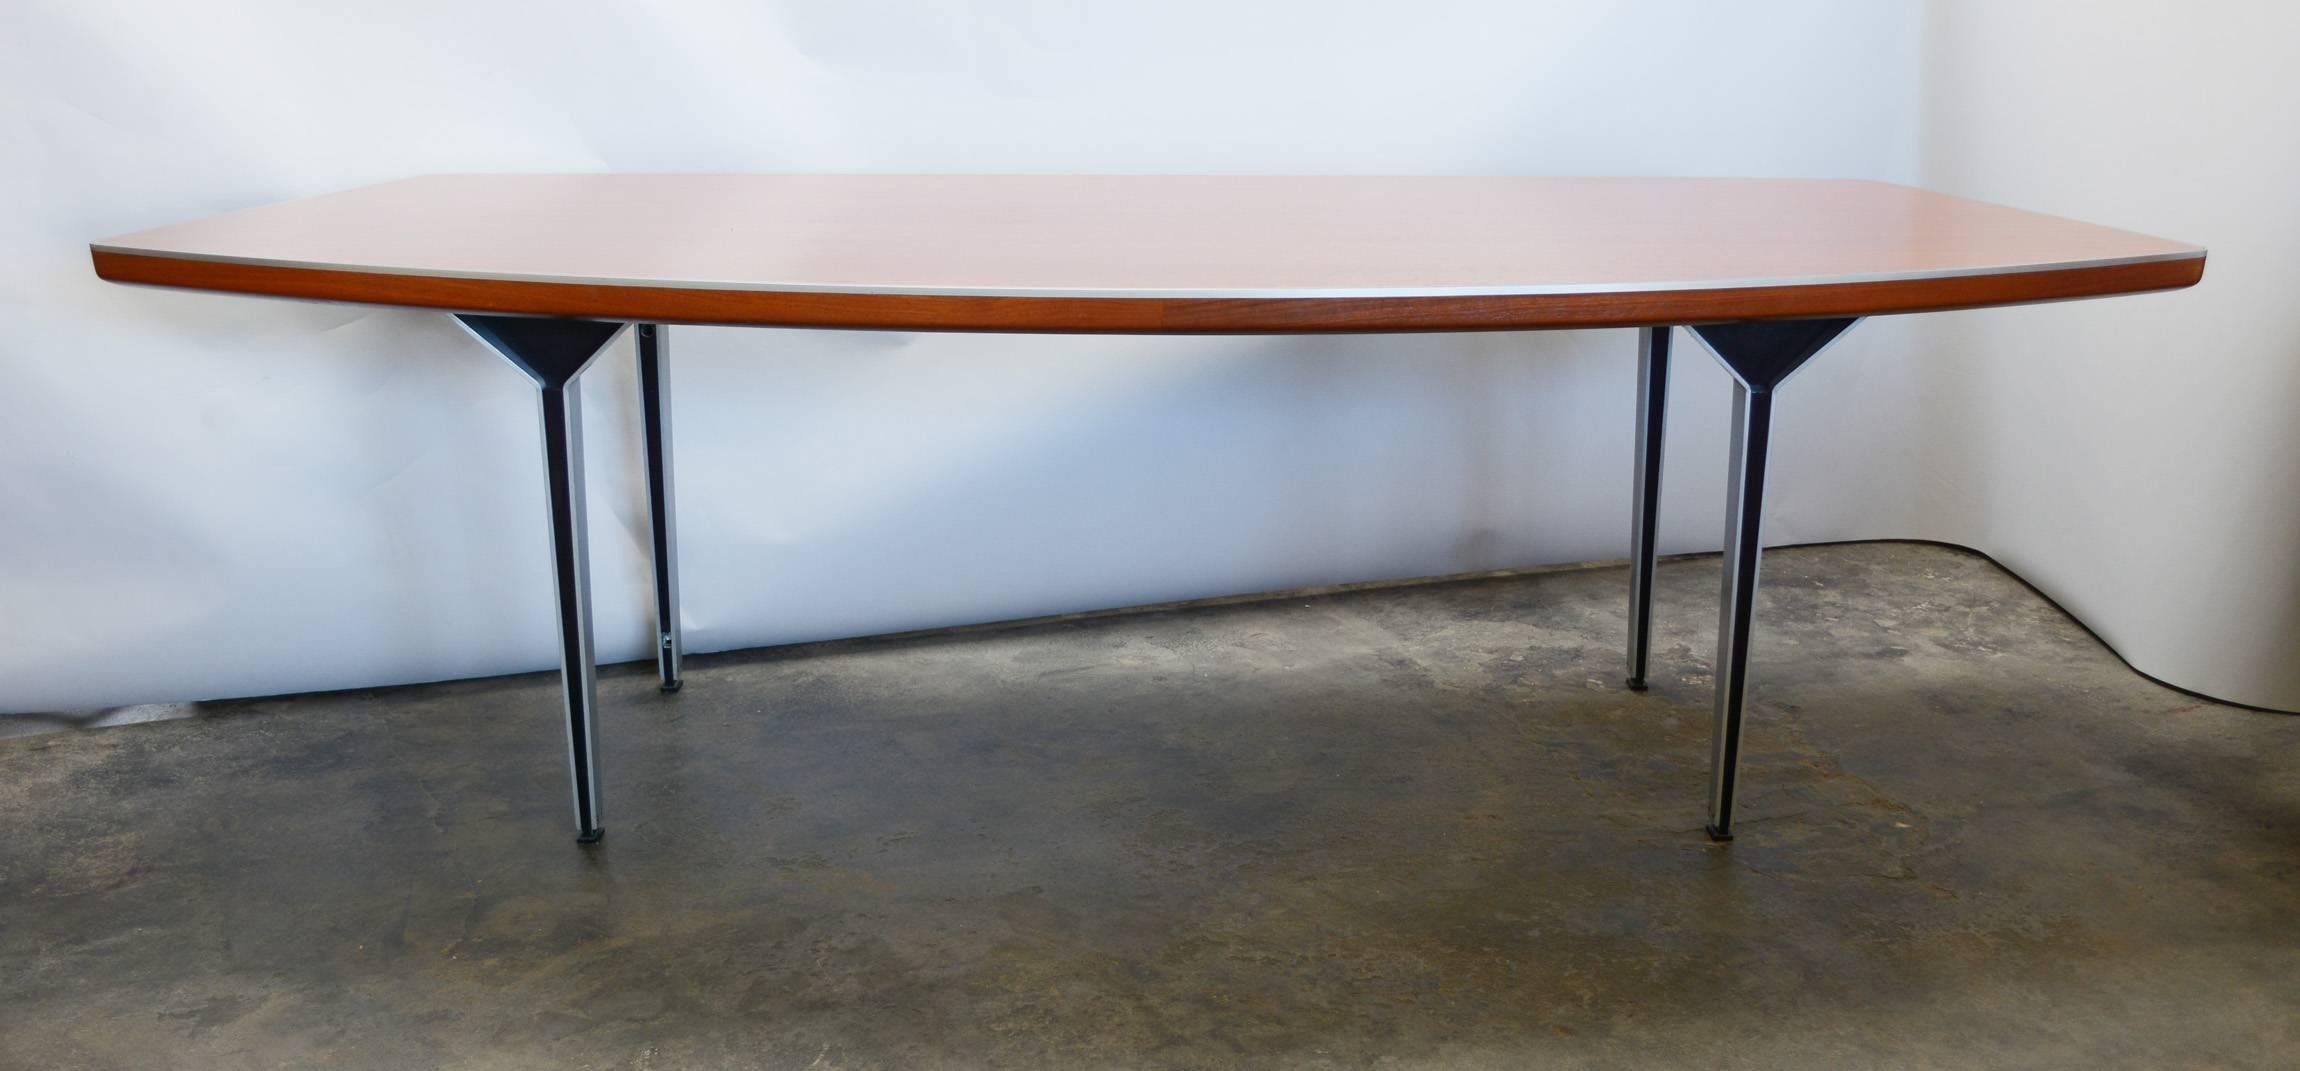 This desk is likely a custom-made piece. The architectural aluminum legs have black anodized aluminum in the center that become the glide at the bottom. There is a band of aluminum around the top edge of the desk. This shows a little wear to the